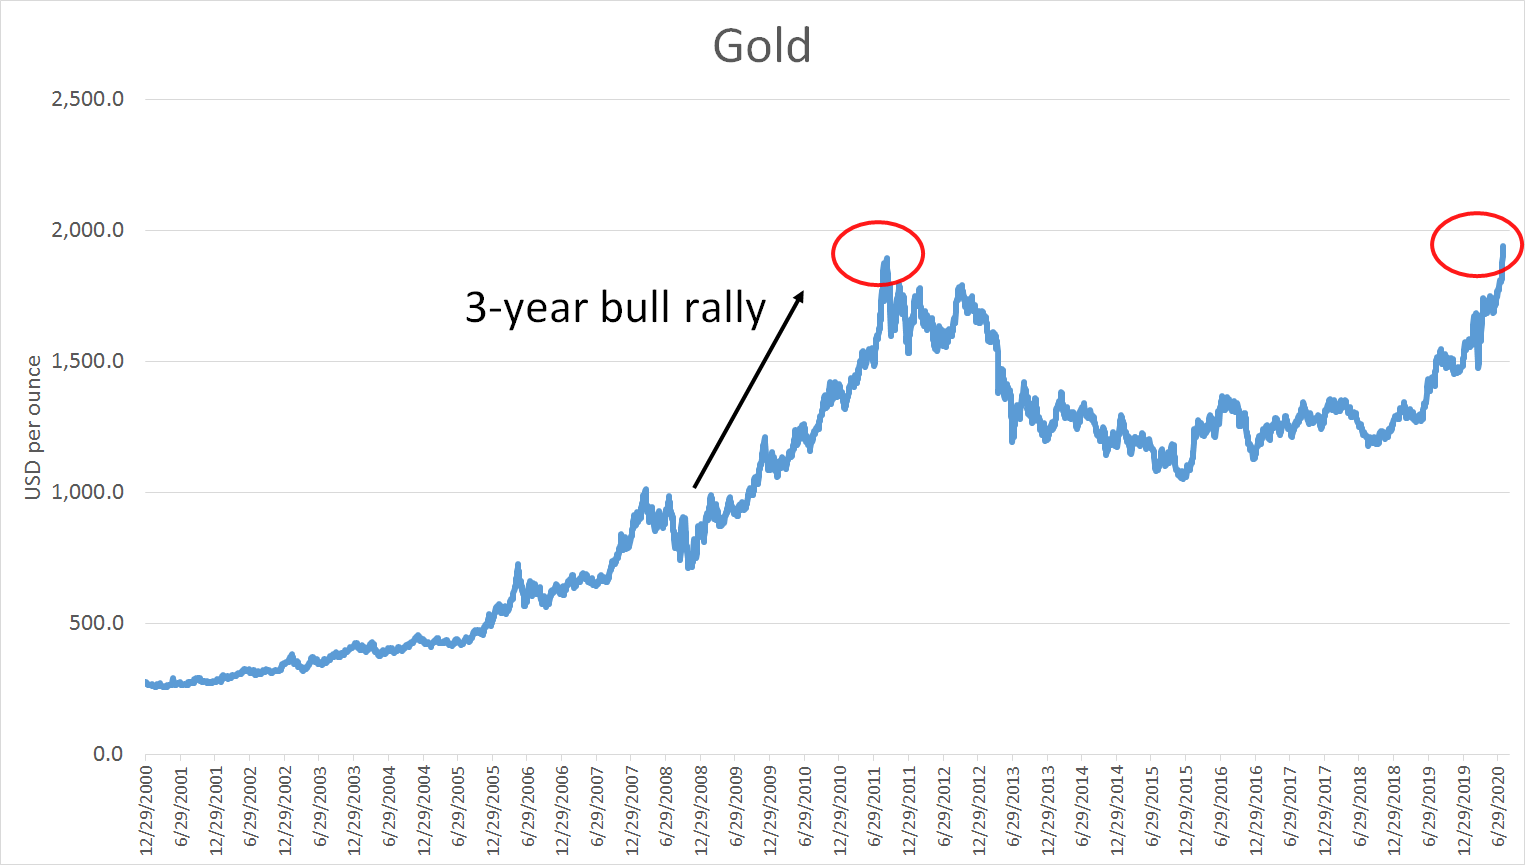 Gold price today July 28: May not stop increase until hitting $4,000